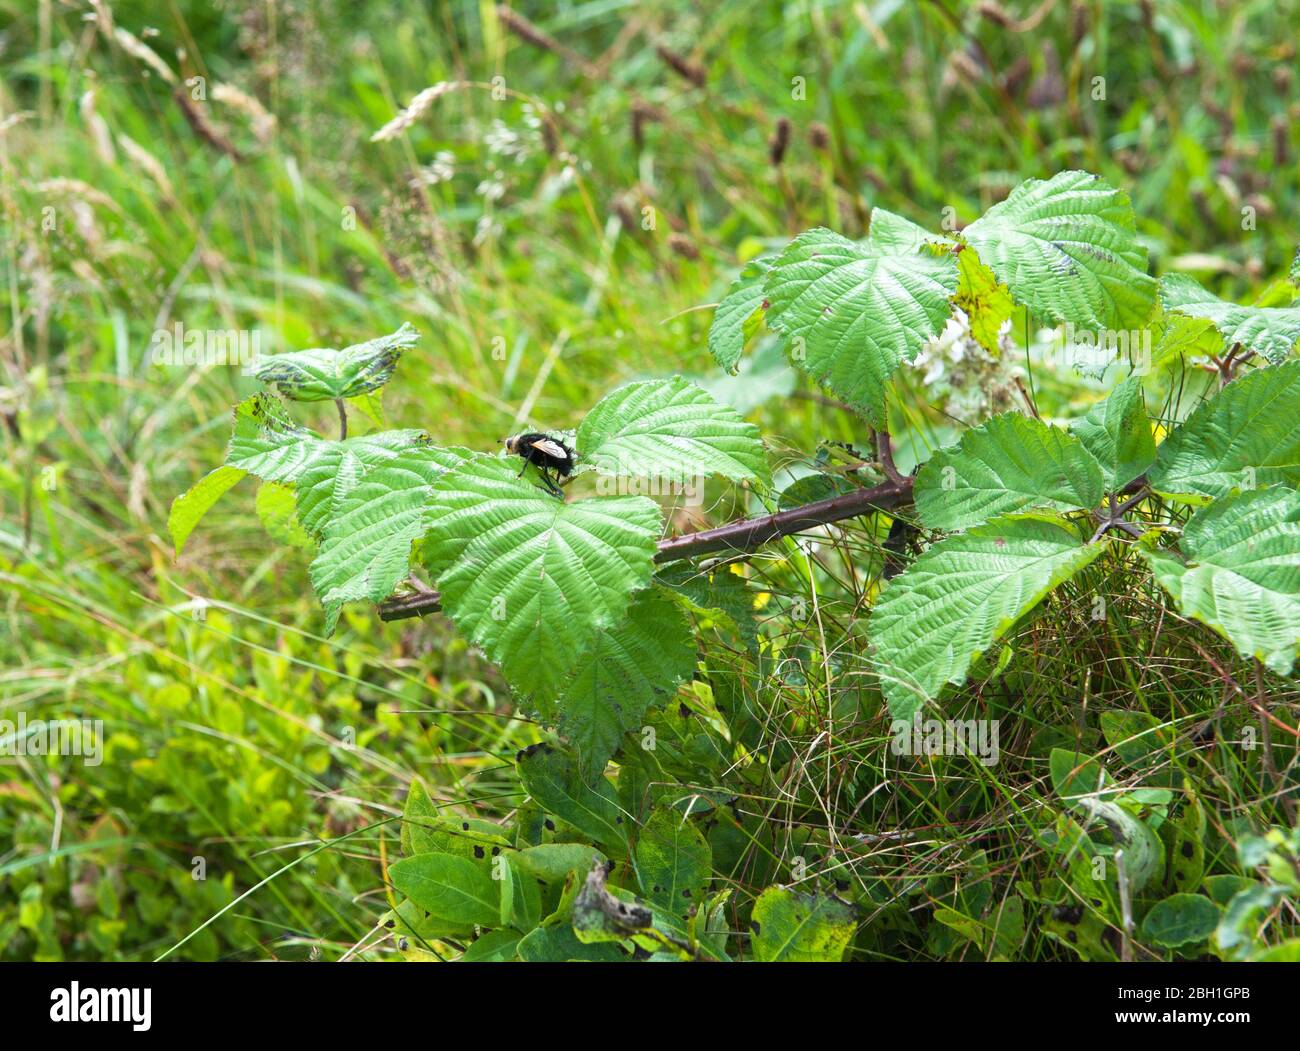 Blackberries green leaves (Bramble) with black fly. Wildespread Stock Photo